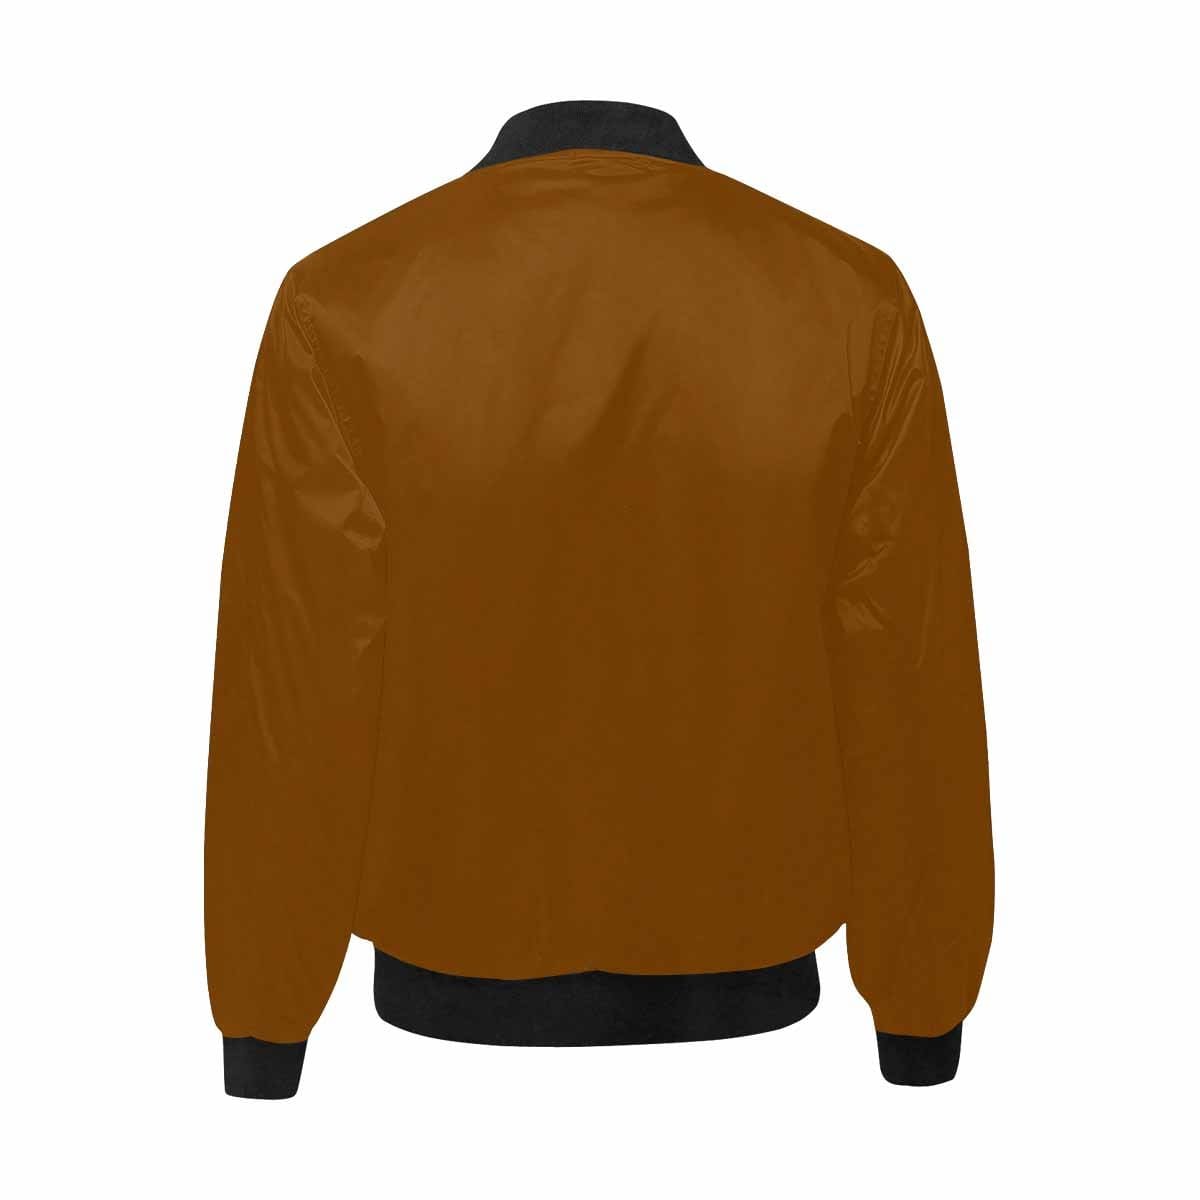 Bomber Jacket For Men Chocolate Brown And Black - Mens | Jackets | Bombers